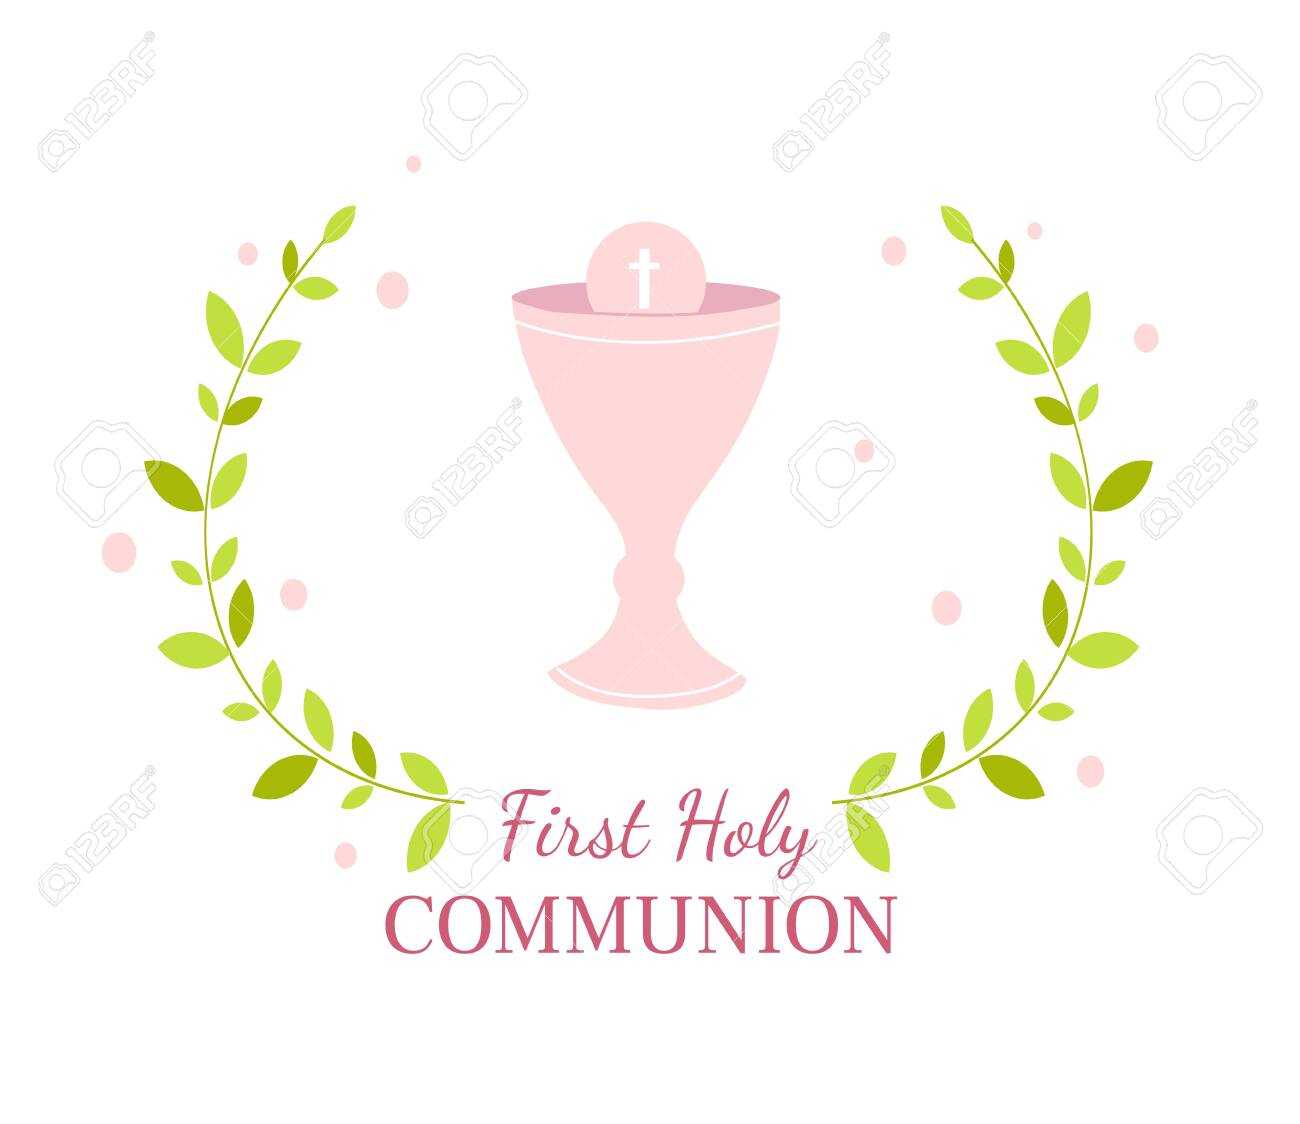 First Holy Communion Greeting Card Design Template Pertaining To First Communion Banner Templates